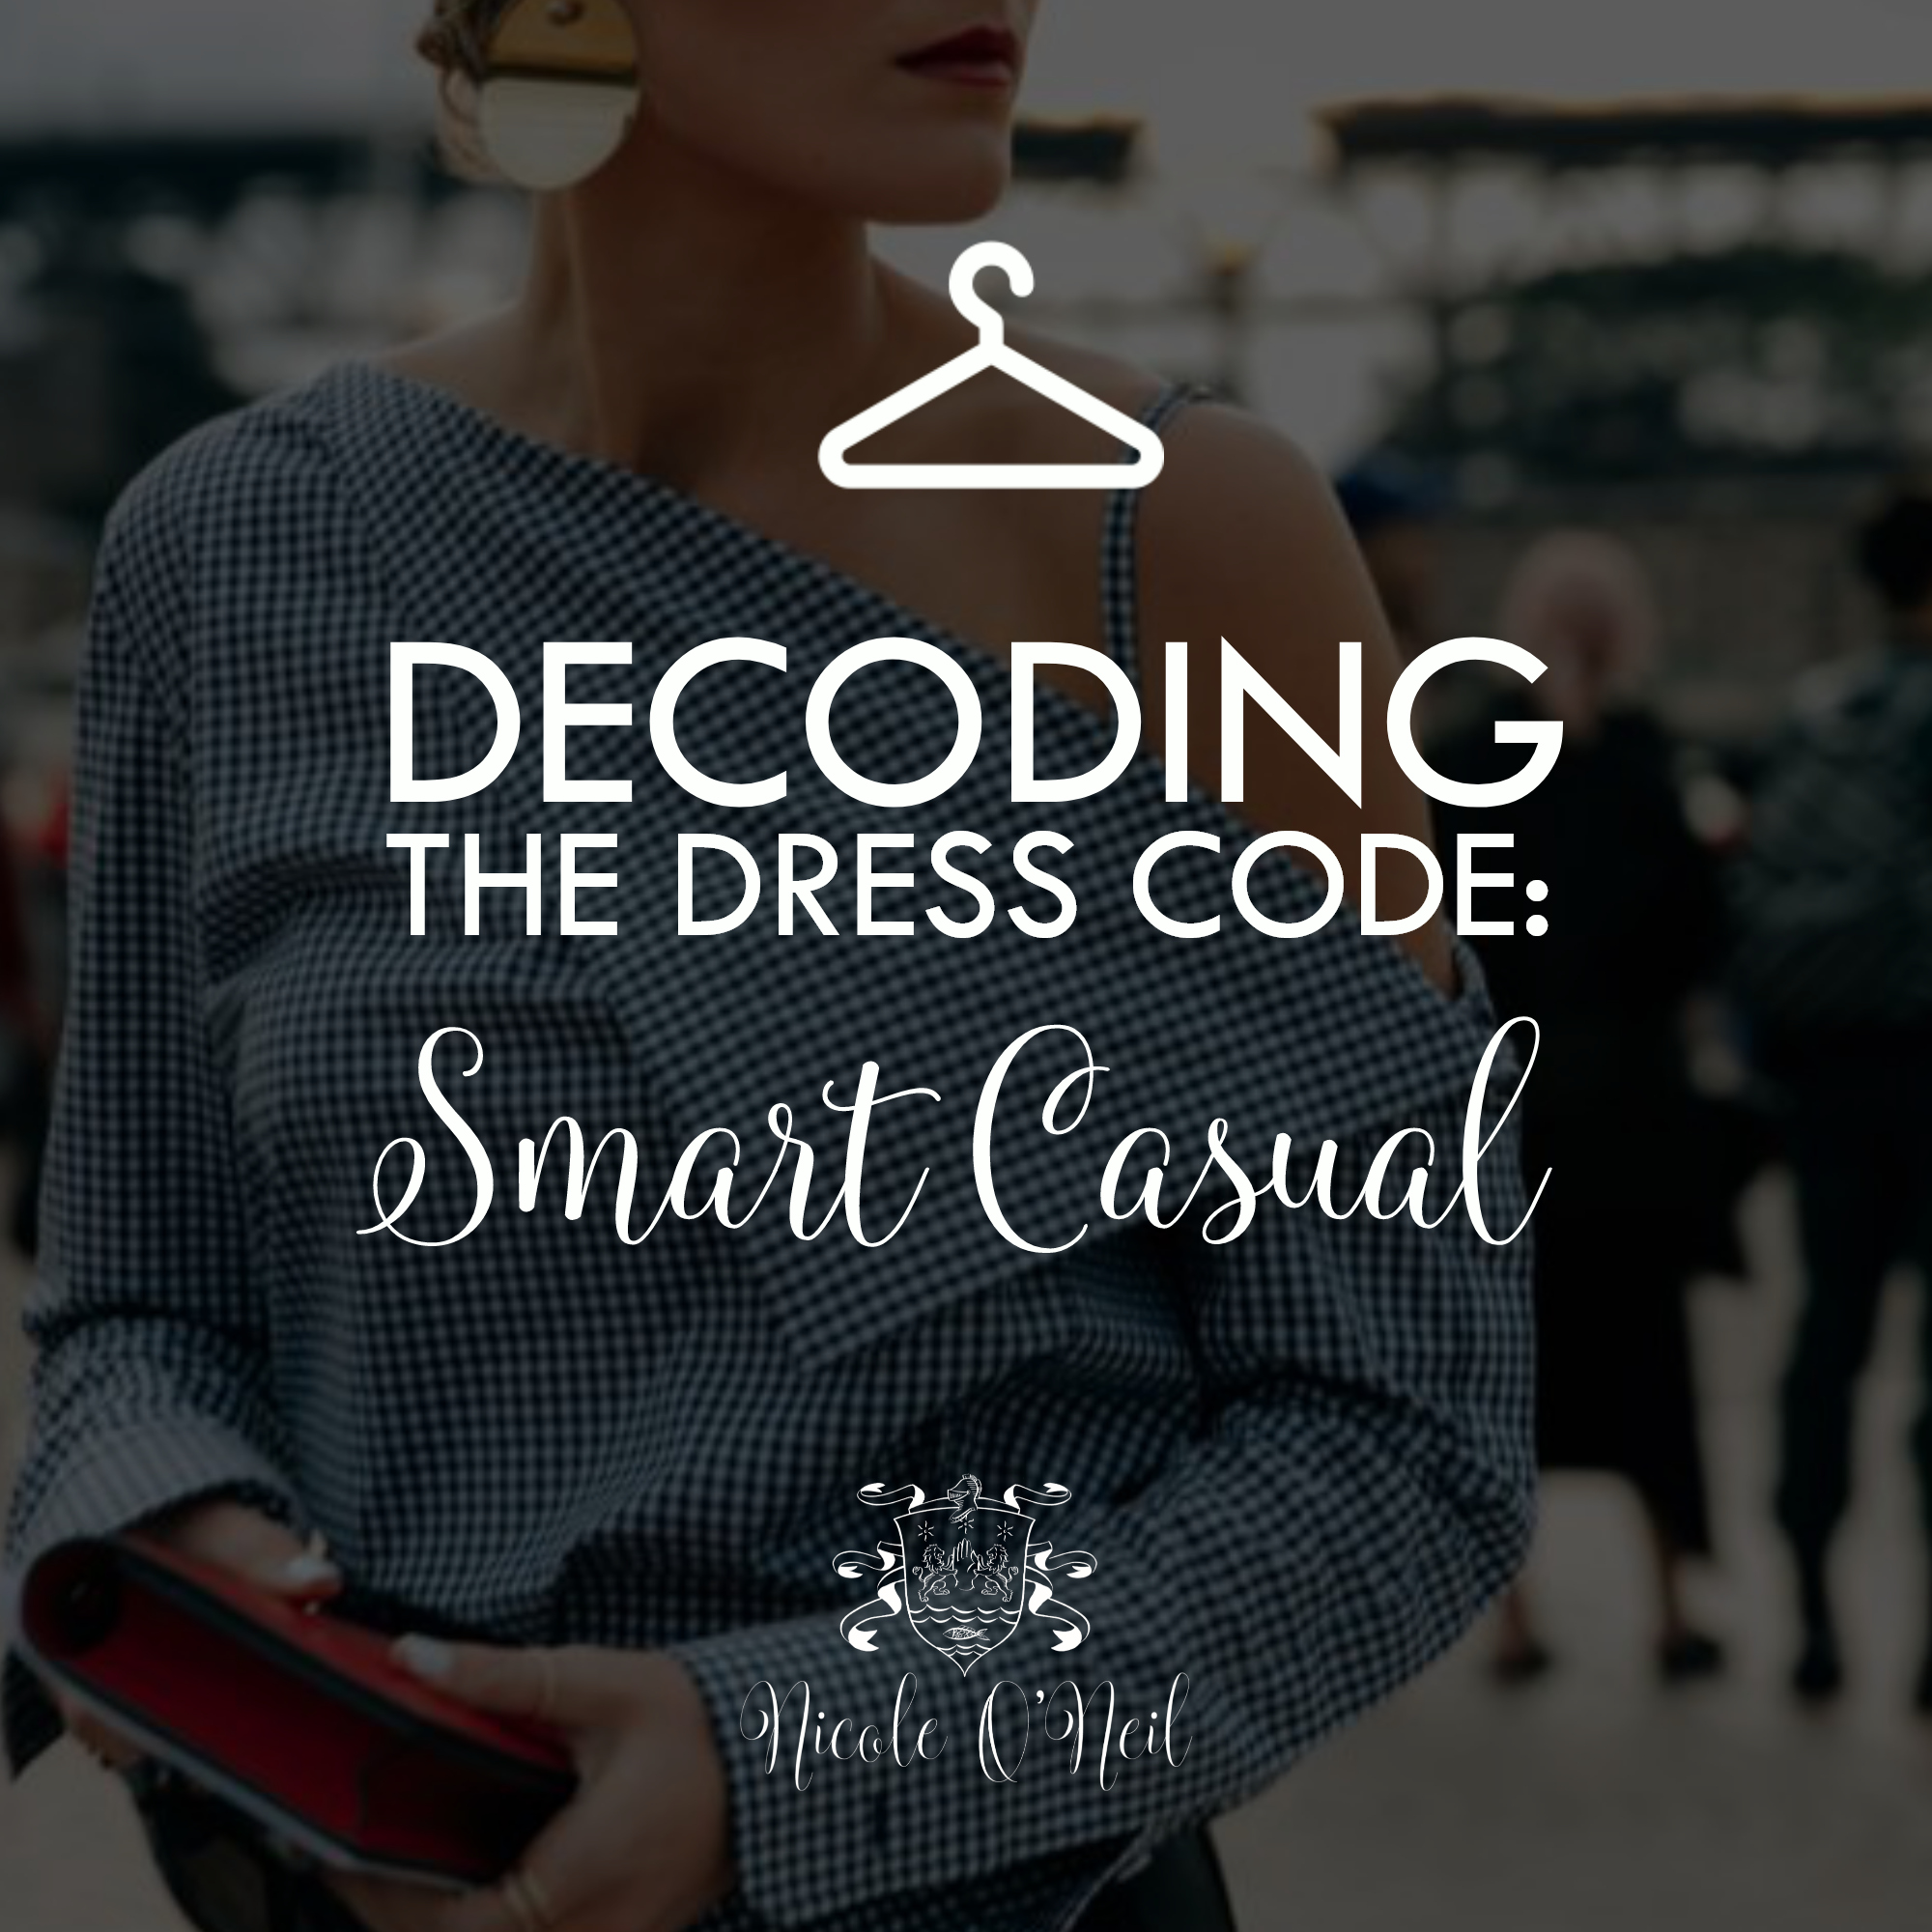 smart casual dress code for birthday party